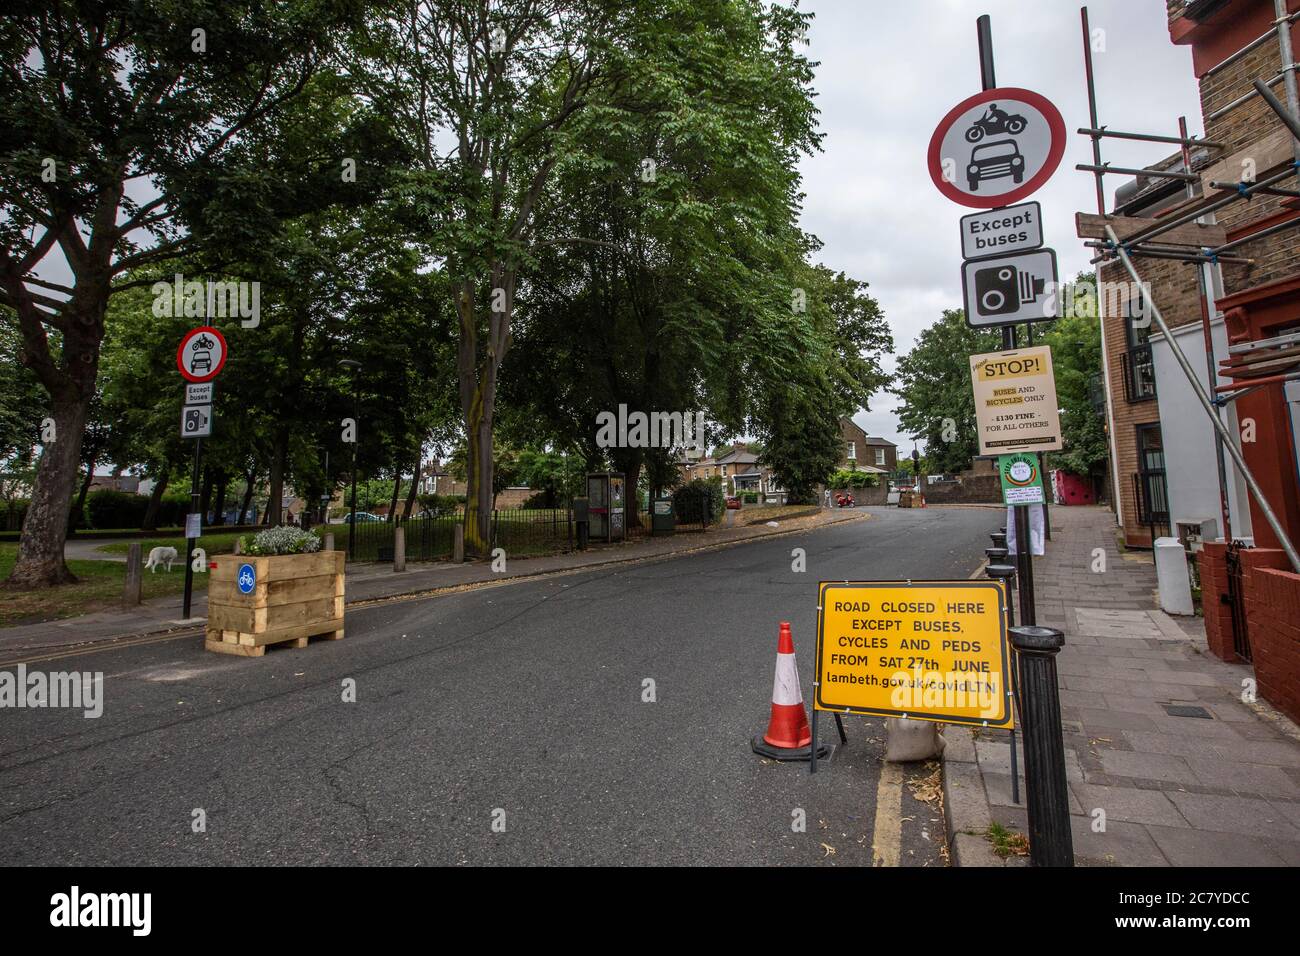 London road blocks to restrict traffic in place to create 'cycle highways' and encourage cycling & cut air pollution on Railton Road, Lambeth SE24 Stock Photo